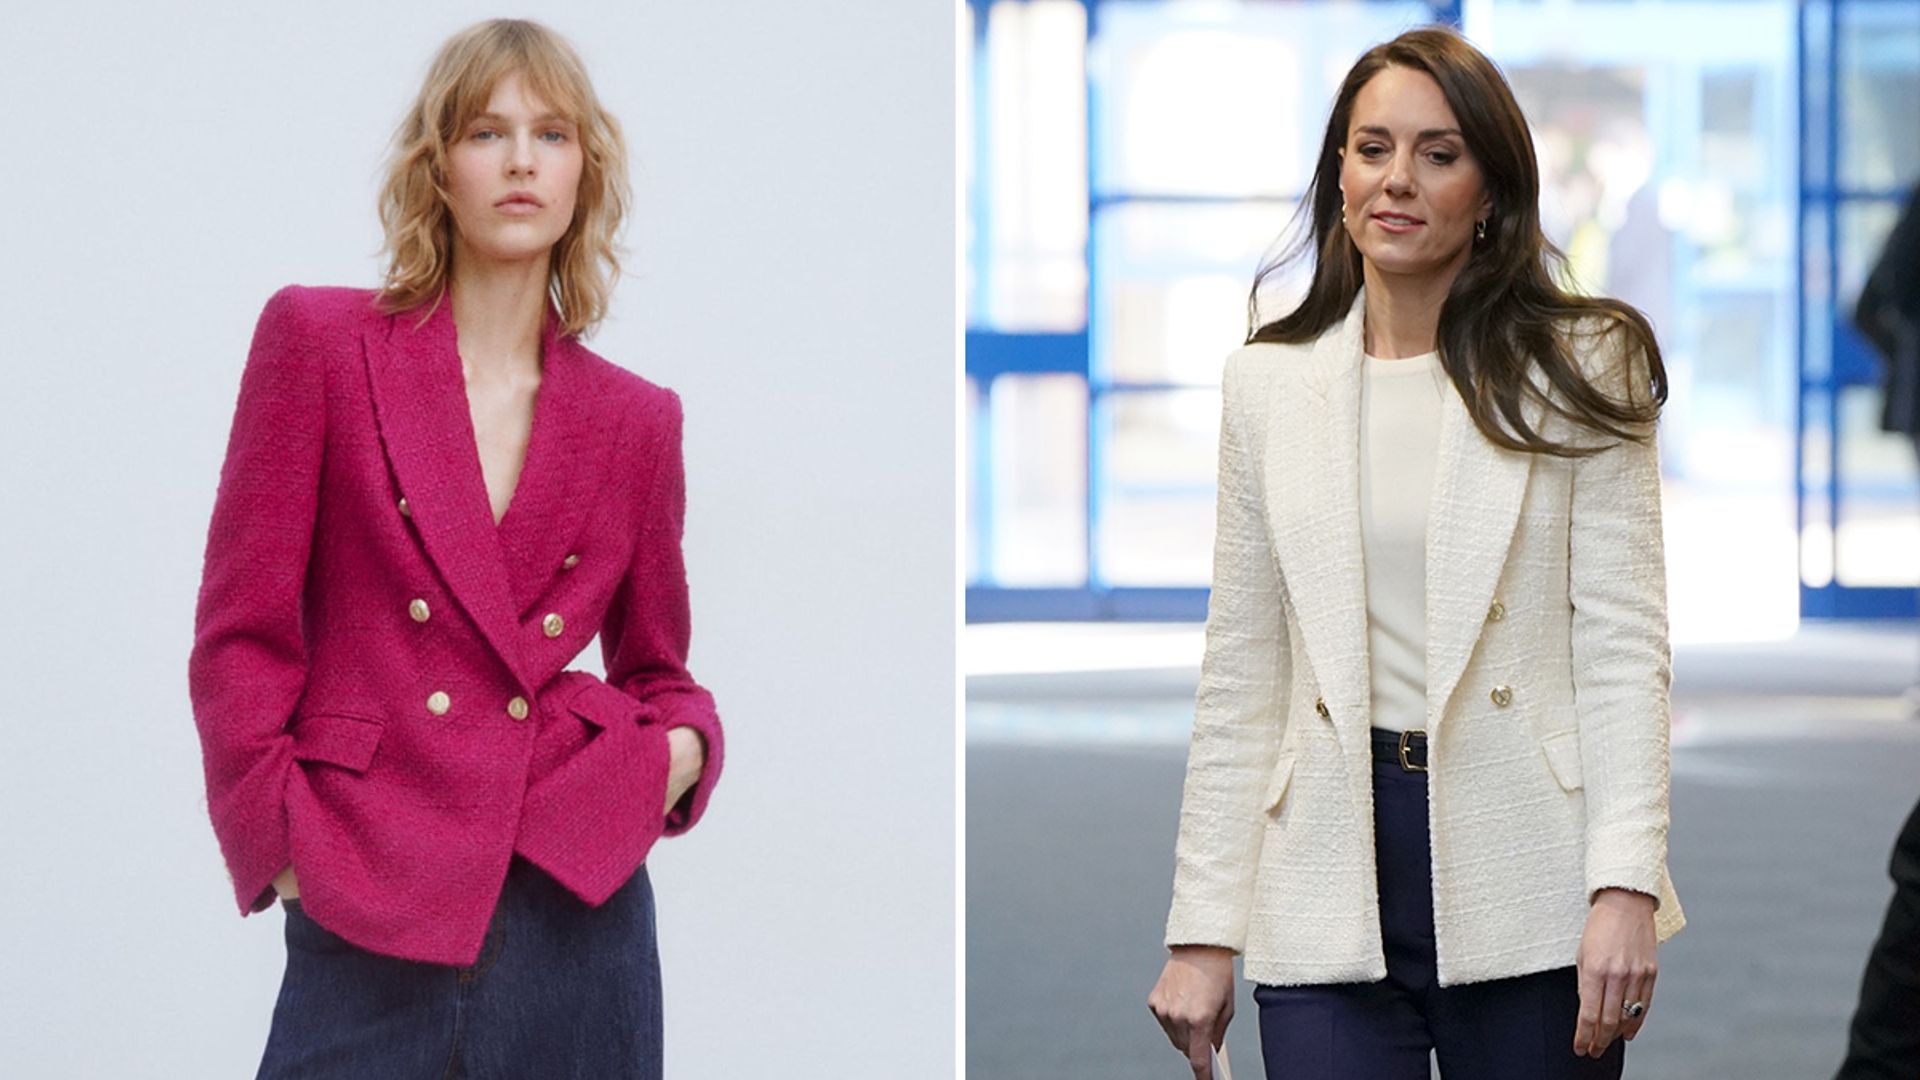 Kate Middleton's chic £70 Zara blazer is available in two other